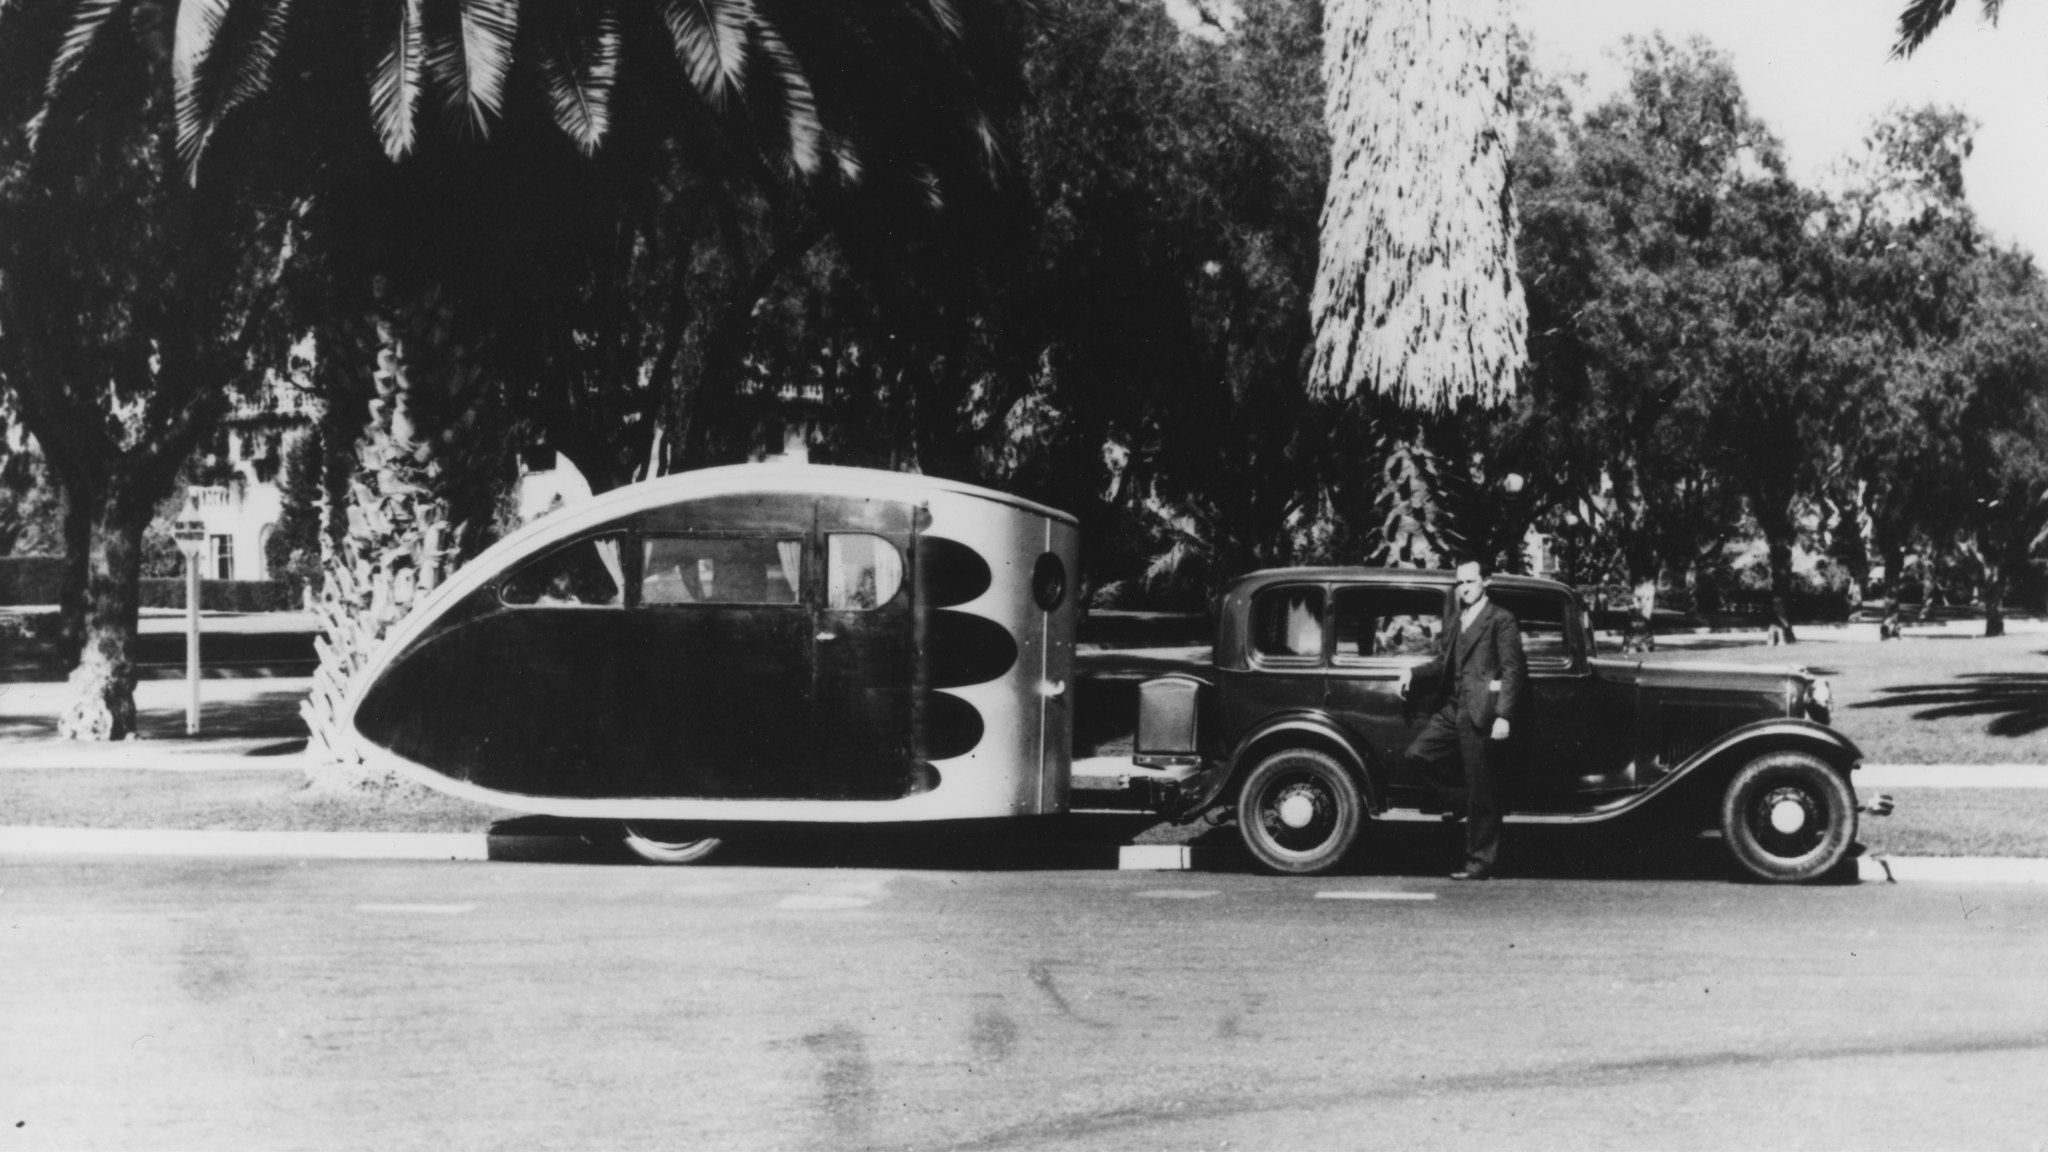 An Airstream Torpedo travel trailer being towed by a vintage car in a tropical area